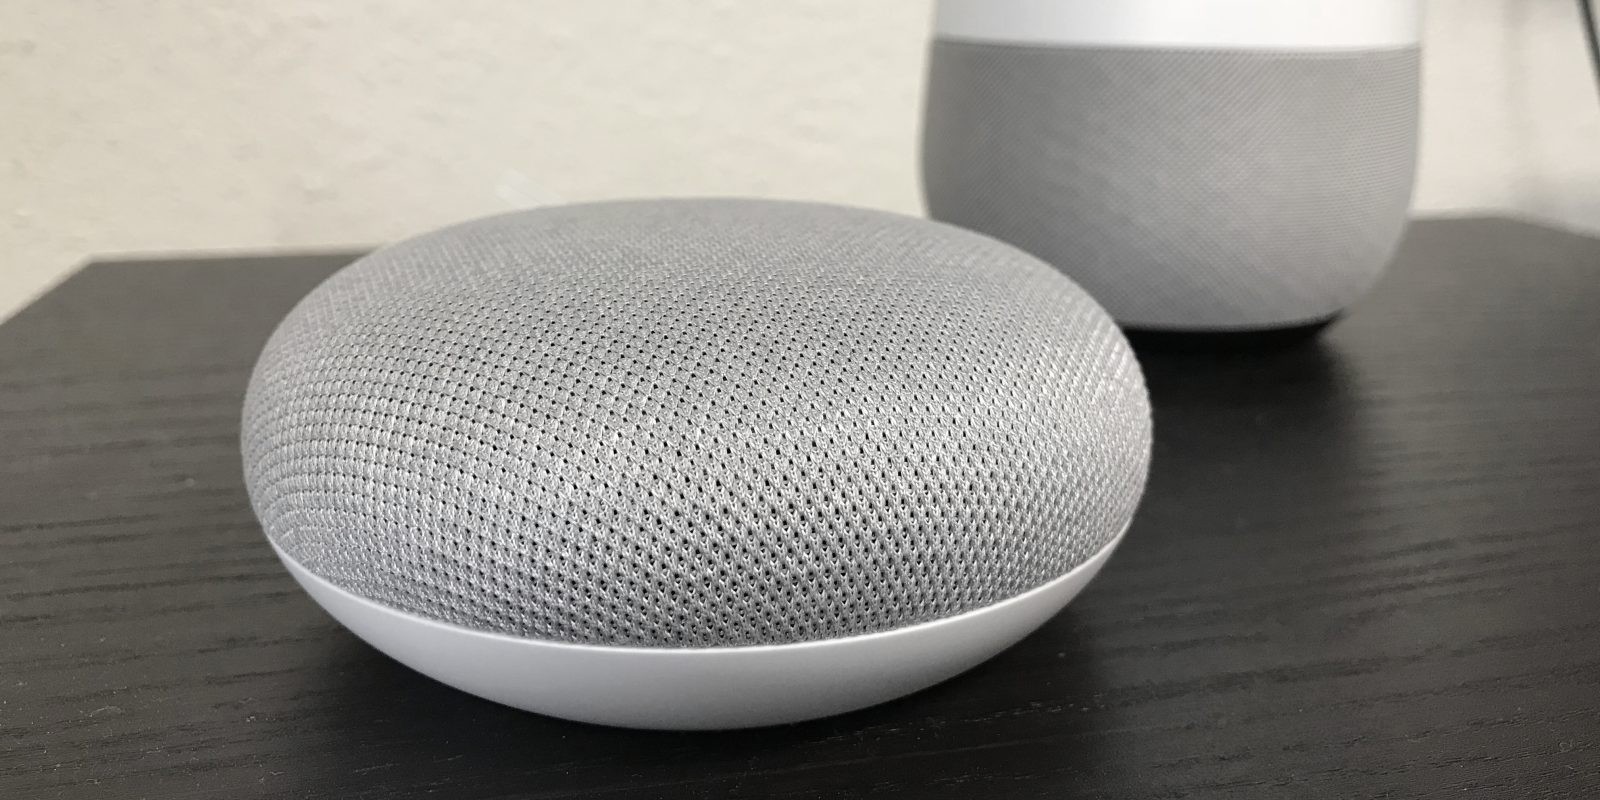 The new Google Home Mini smart speaker, roughly the size of a doughnut, is the smallest member of Google’s ‘home hub’ line.